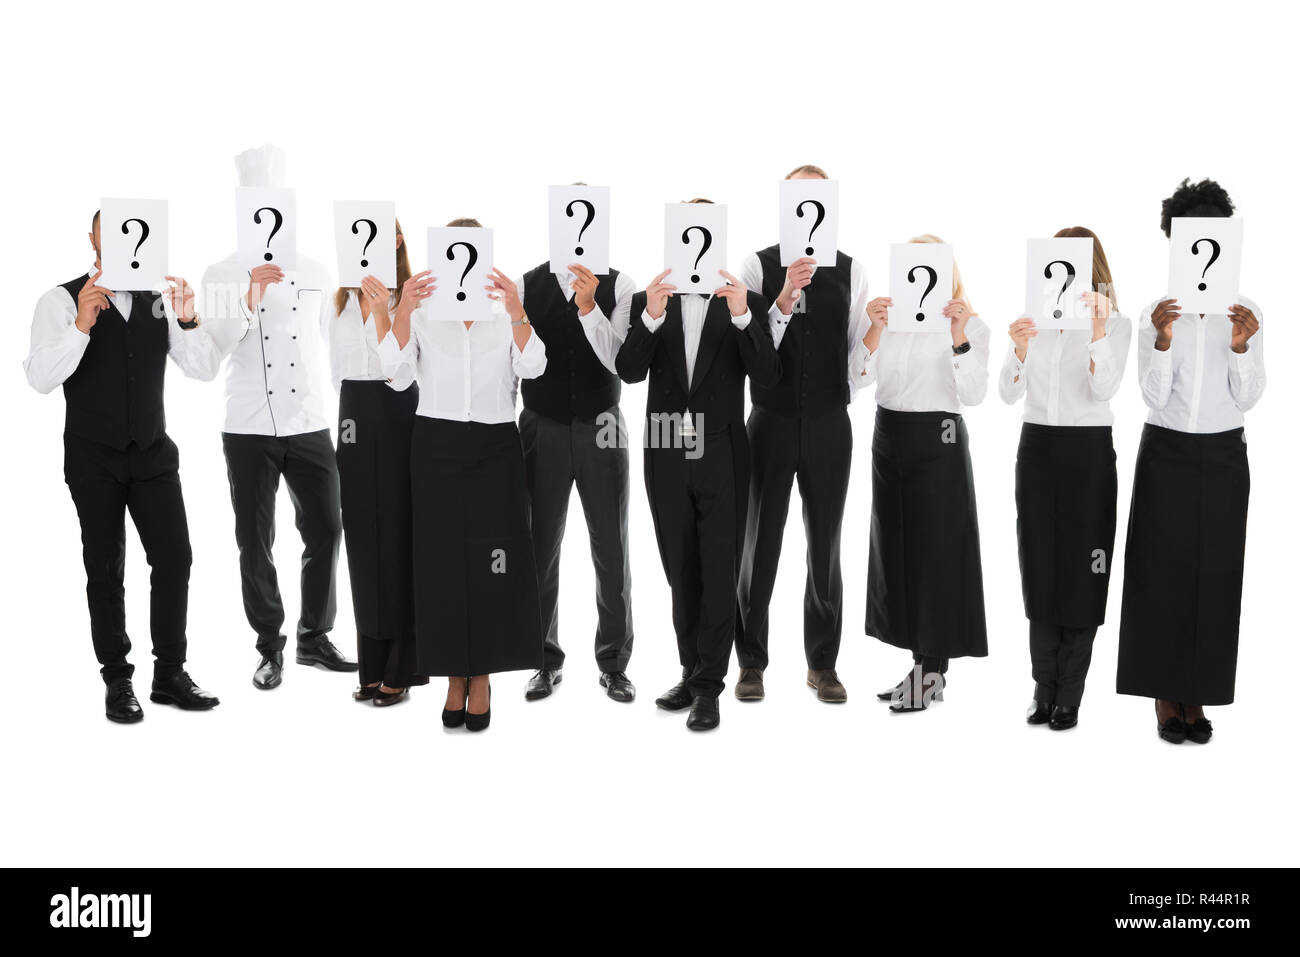 Restaurant Staff Hiding Faces With Question Mark Signs Stock Photo